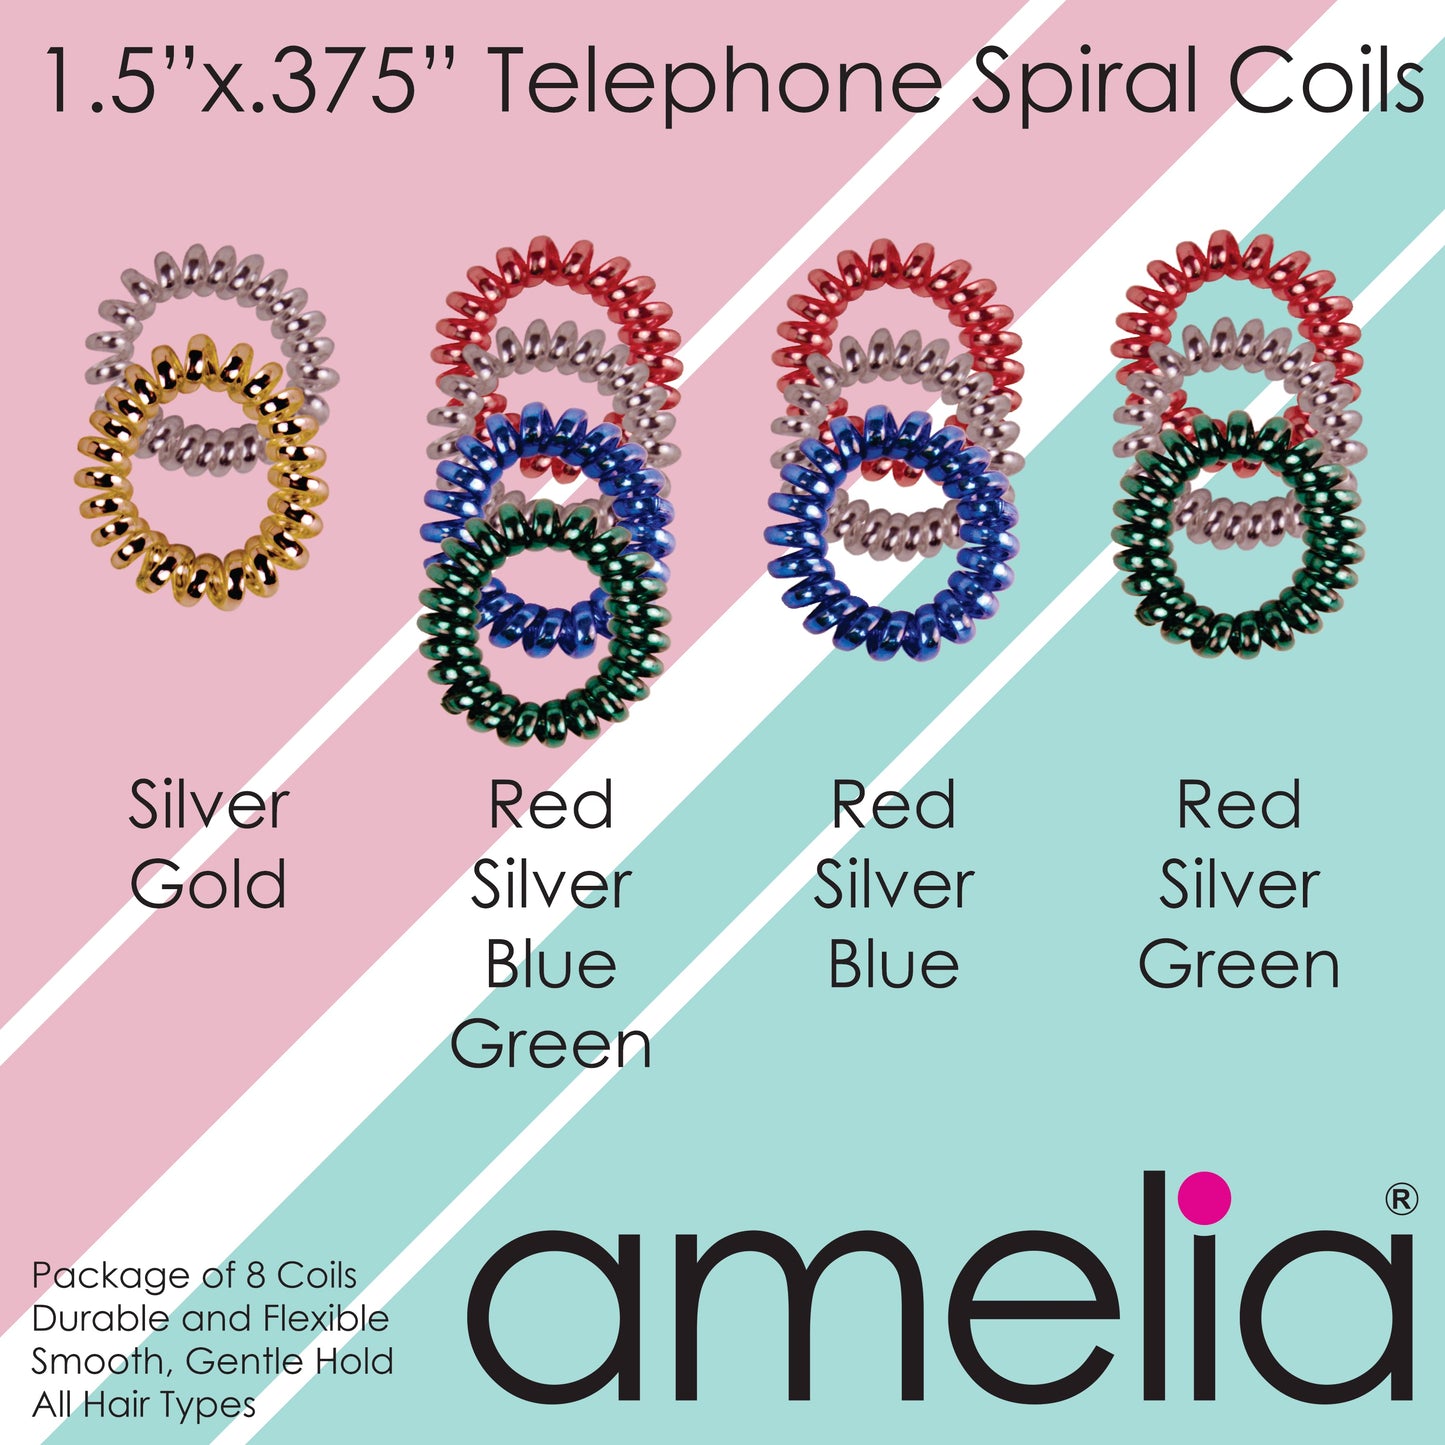 Amelia Beauty, 8 Small Shinny Elastic Hair Telephone Cord Coils, 1.5in Diameter Spiral Hair Ties, Strong Hold, Gentle on Hair, Silver, Red, Blue and Green Mix